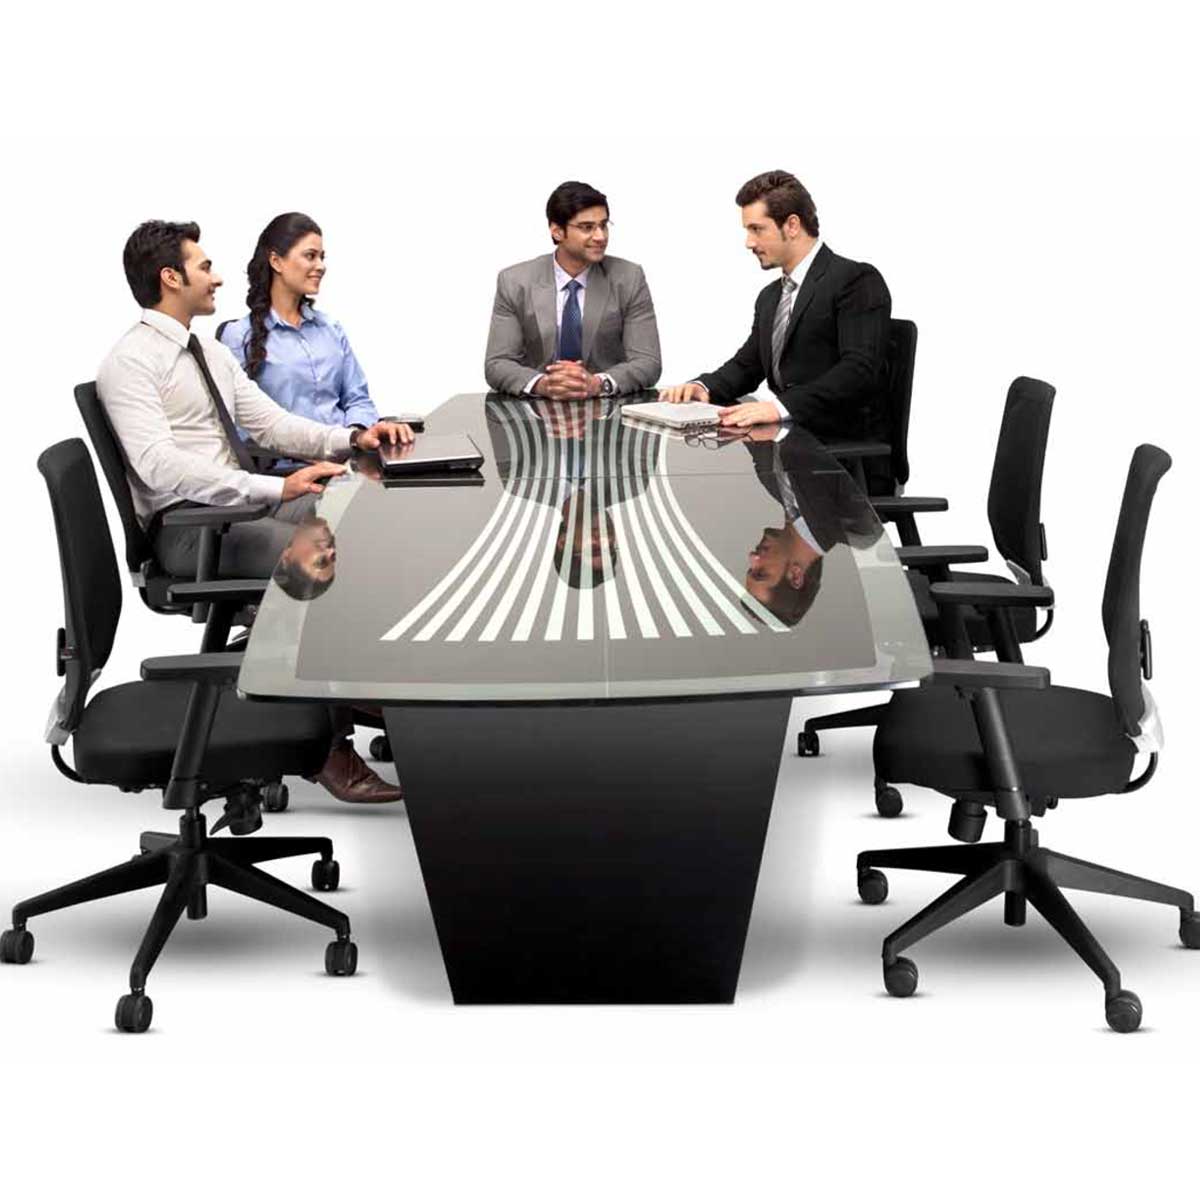 Metal Office Table Manufacturers, Suppliers in Rohini Sector 10